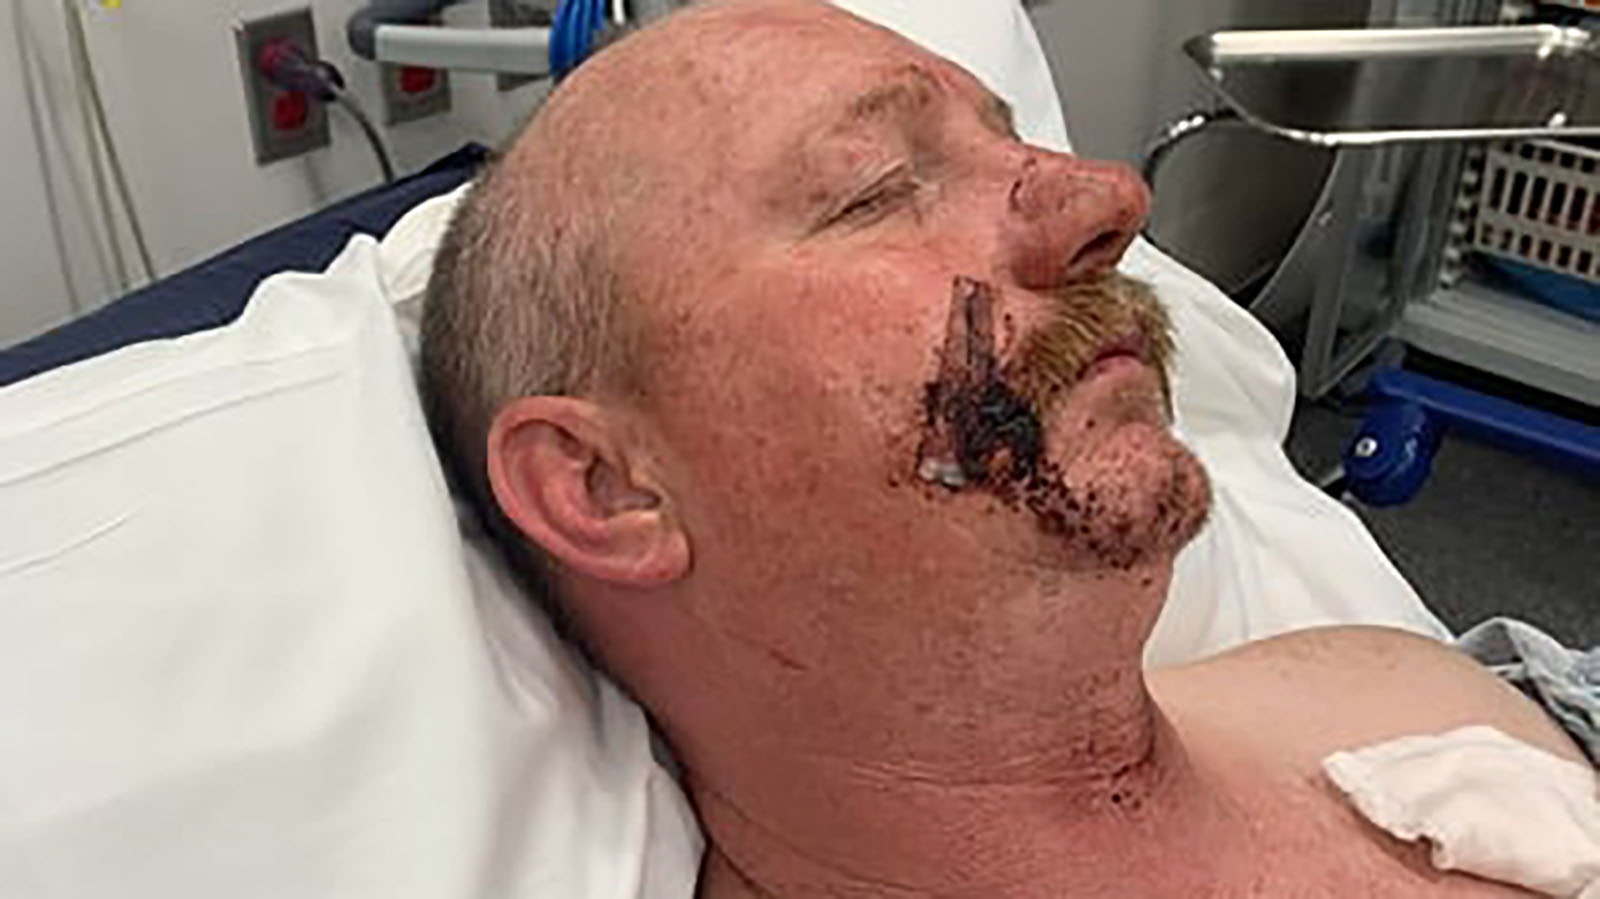 Moorcroft, Wyoming, resident Michael Hammond Jr. was picked up in Nebraska over the weekend after allegedly beating his wife. During the ordeal, she reportedly got her hands on a knife and stabbed him to end an hours-long beating.